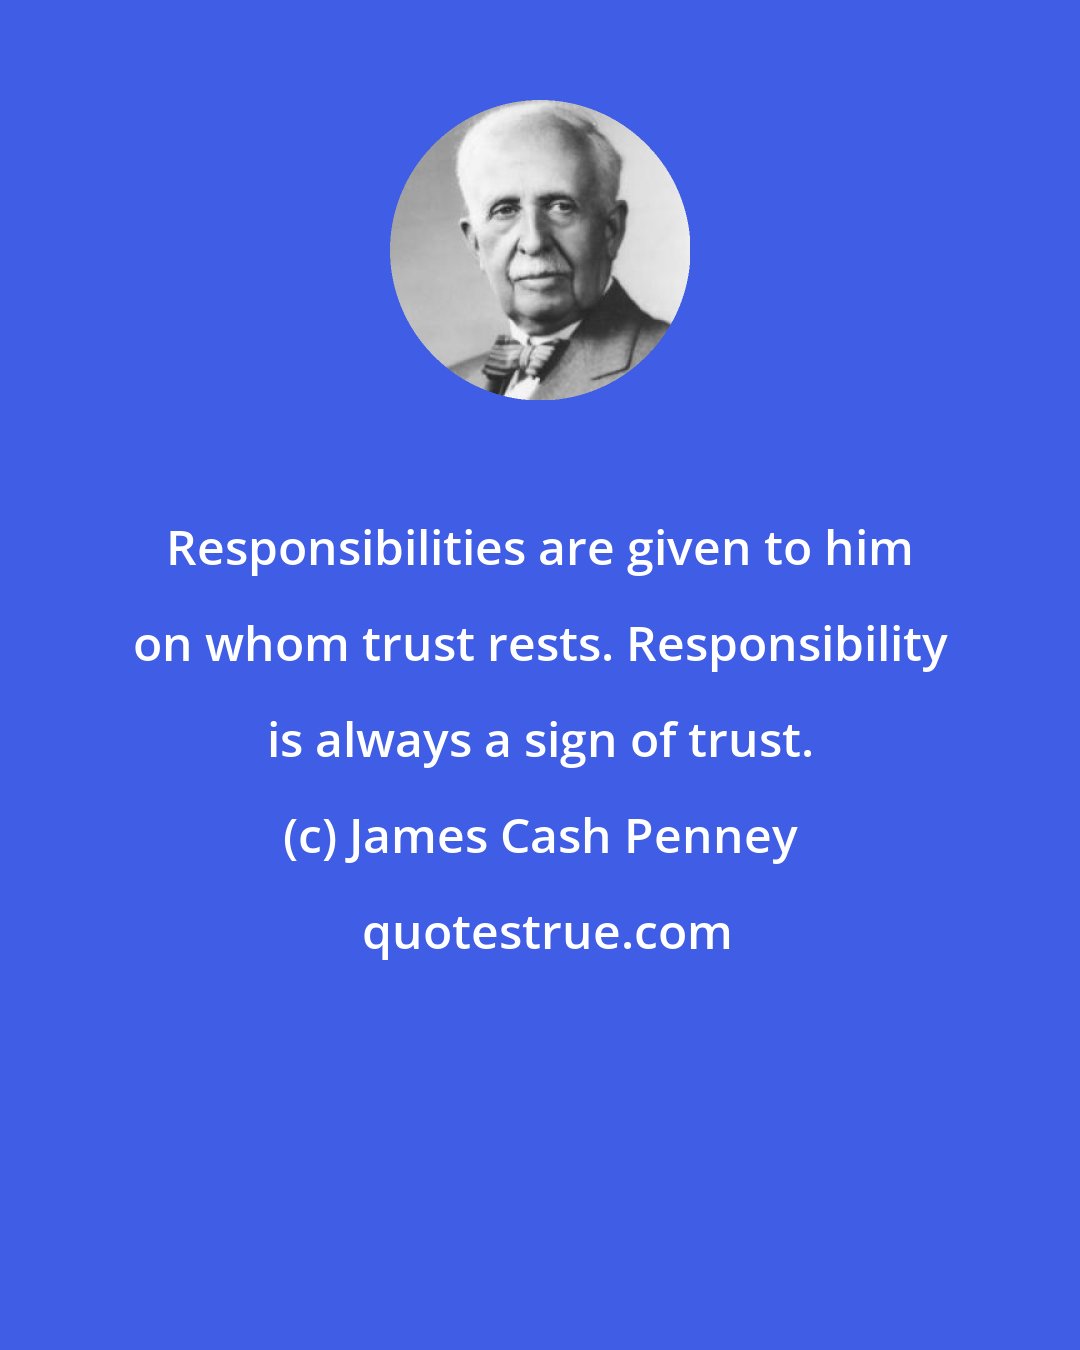 James Cash Penney: Responsibilities are given to him on whom trust rests. Responsibility is always a sign of trust.